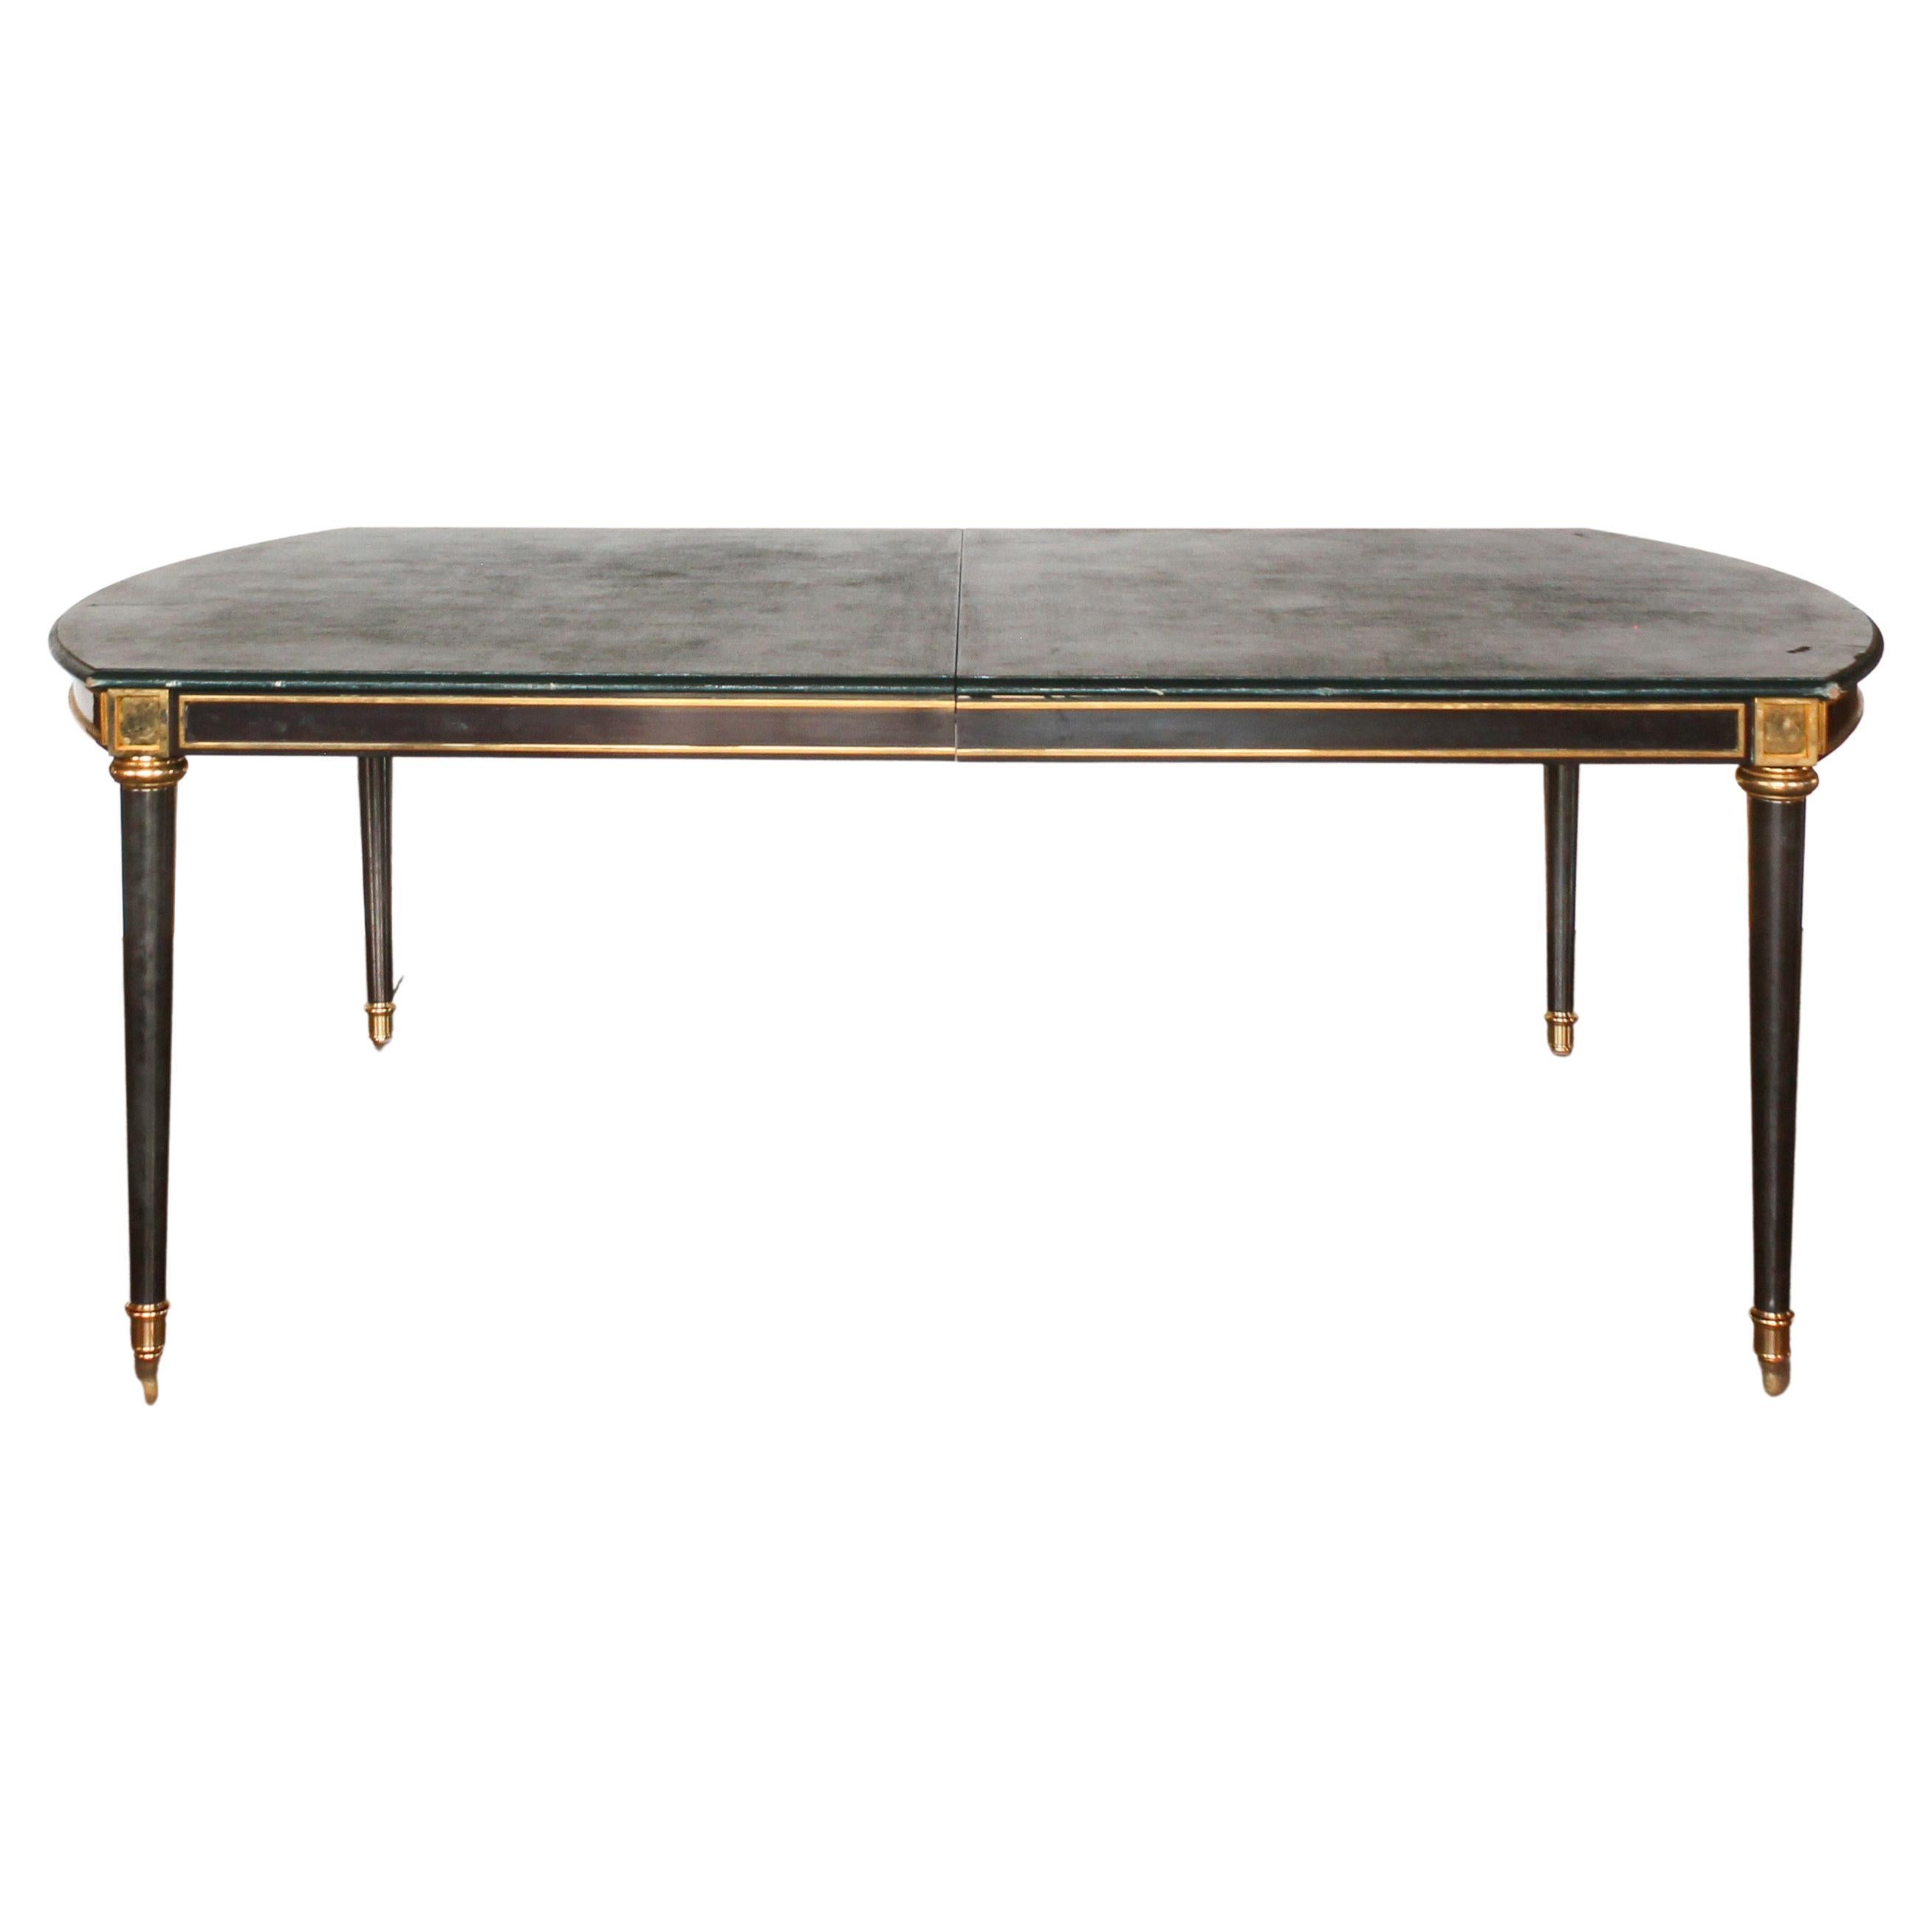 Late 19th/Early 20th Century Neoclassical Style Gilt-Bronze-Mounted Dining Table For Sale